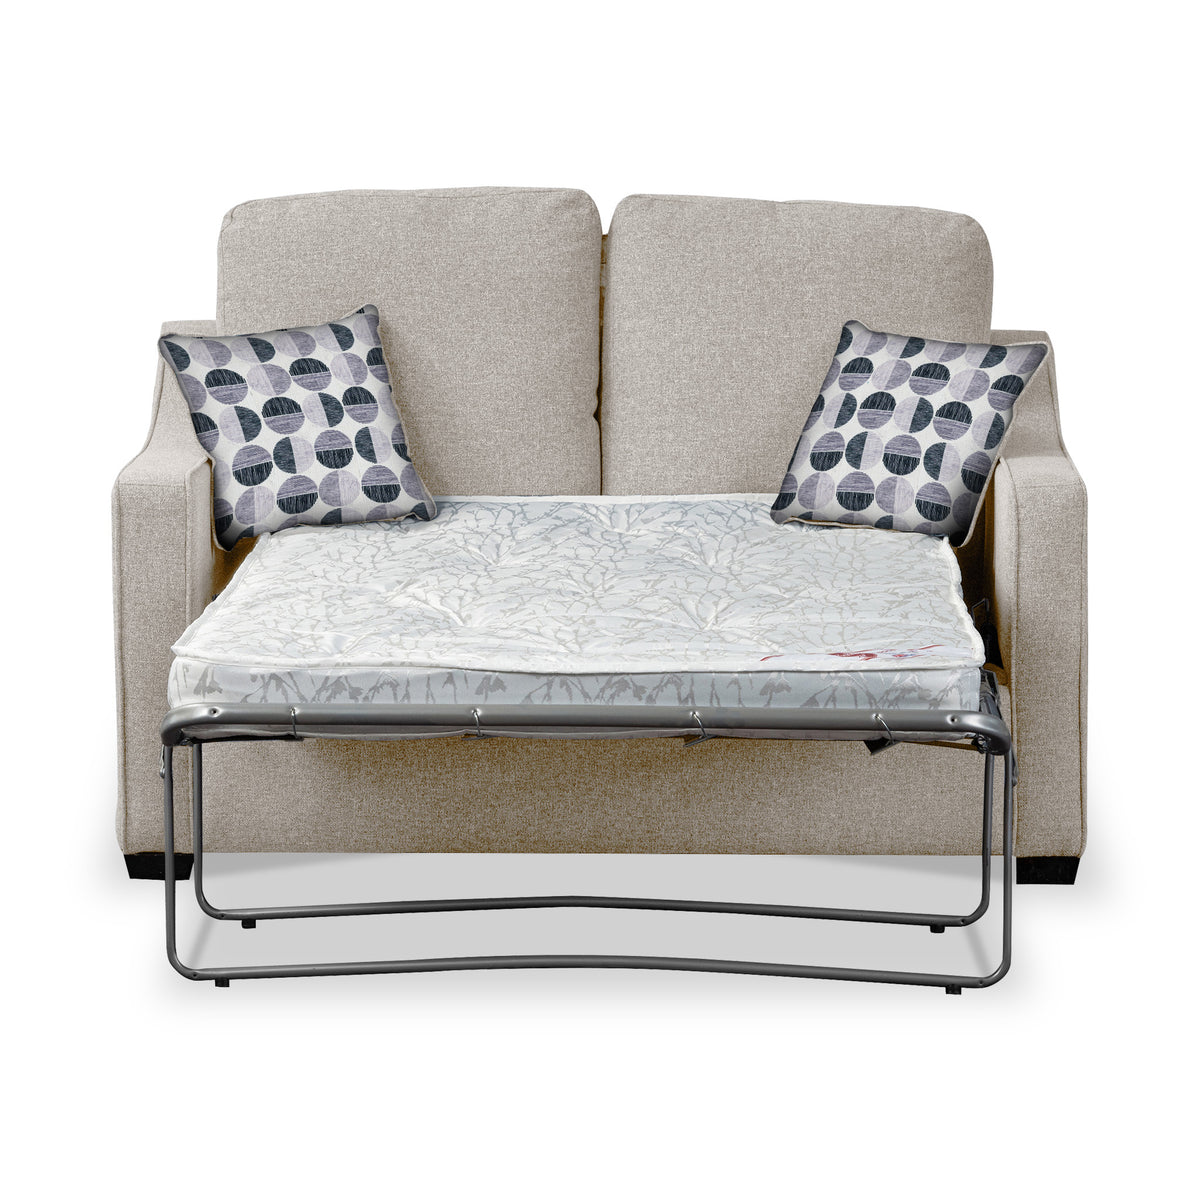 Fenton Oatmeal Soft Weave 2 Seater Sofabed with Mono Scatter Cushions from Roseland Furniture